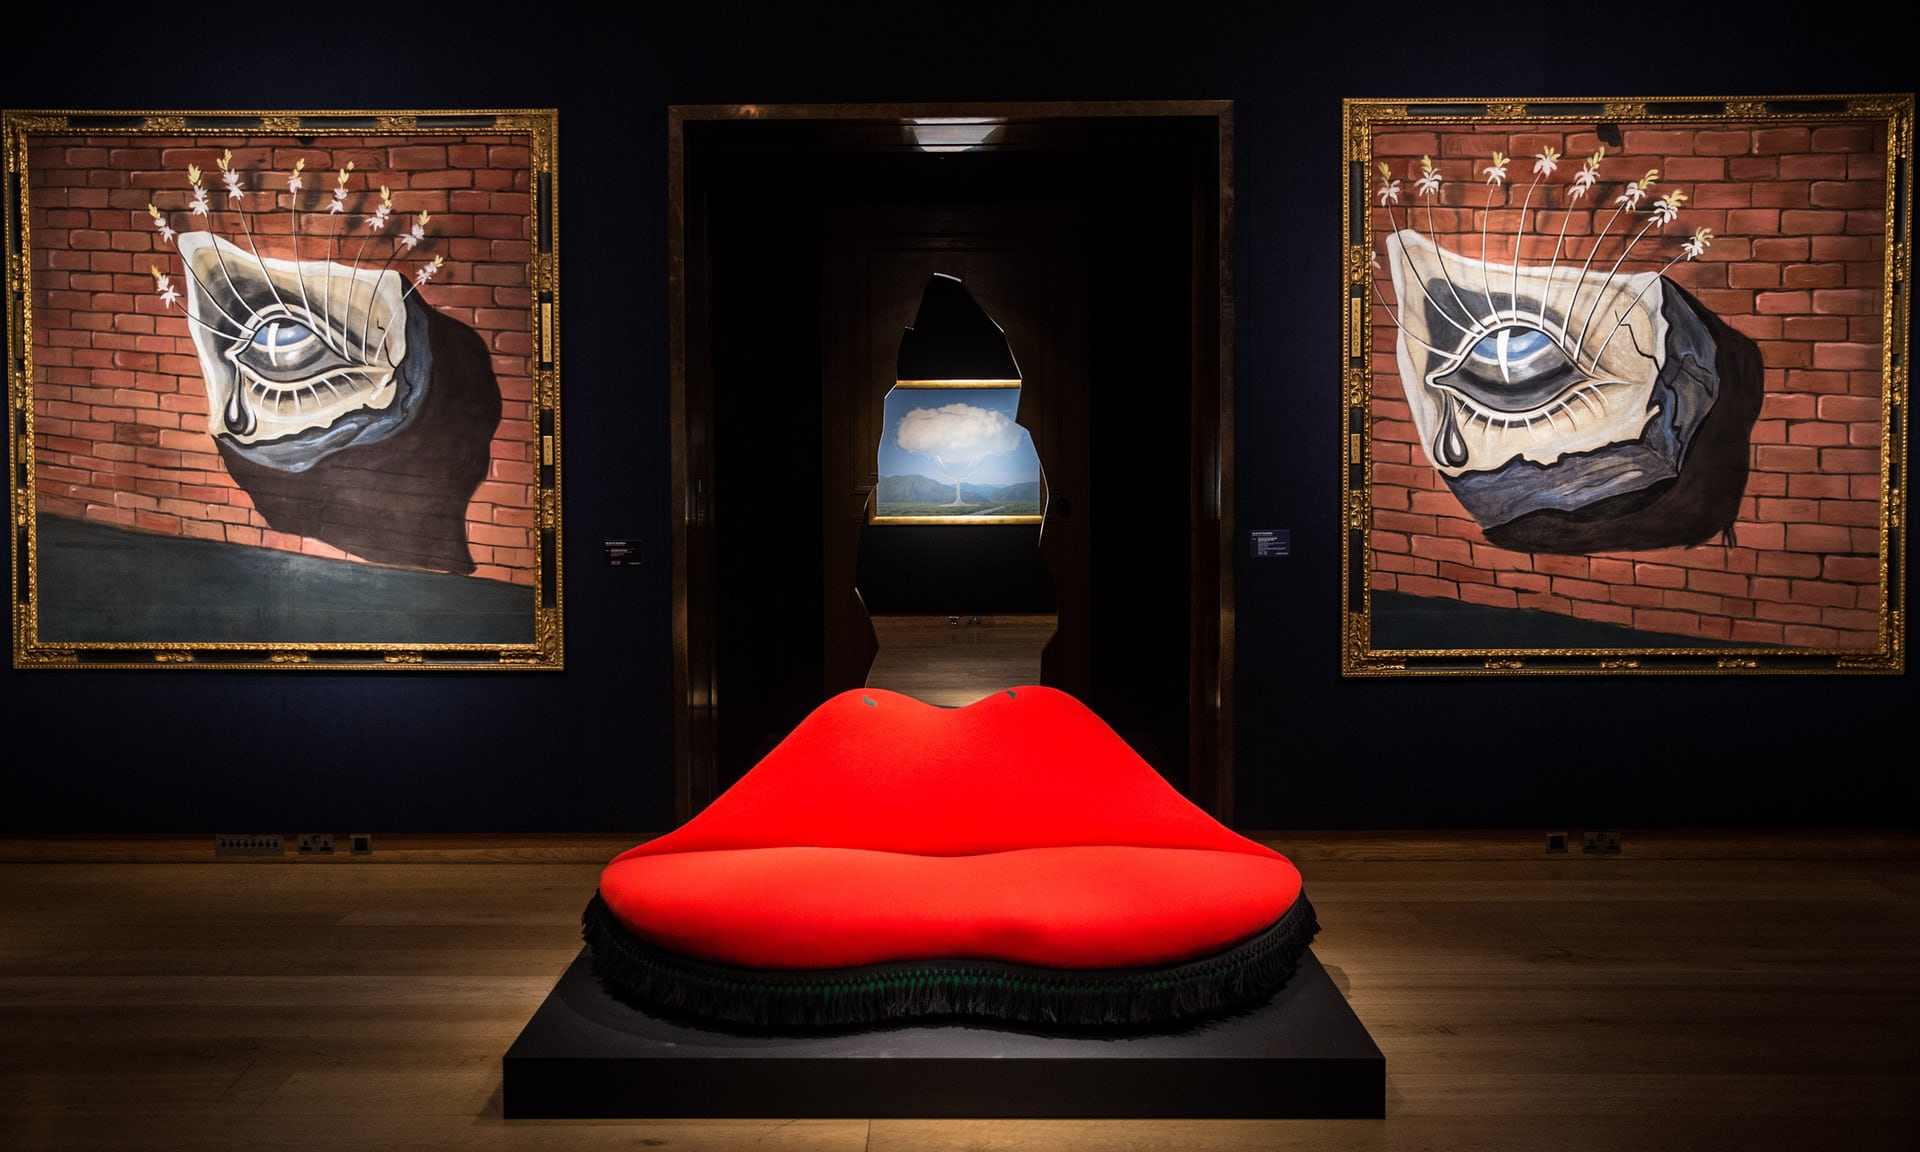 Dali's sculpture of Mae West's lips, forming a couch.